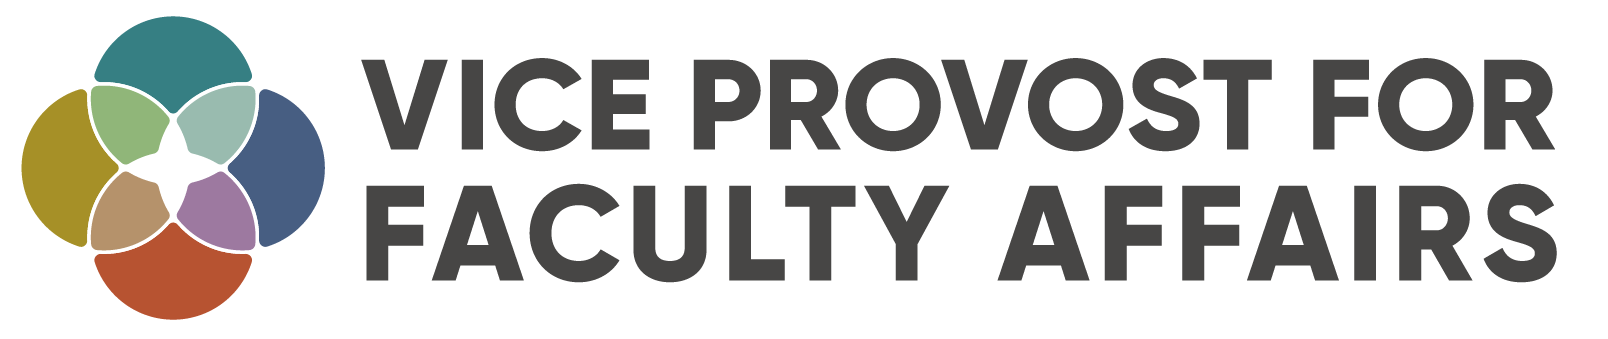 Vice Provost For Faculty Affairs logo